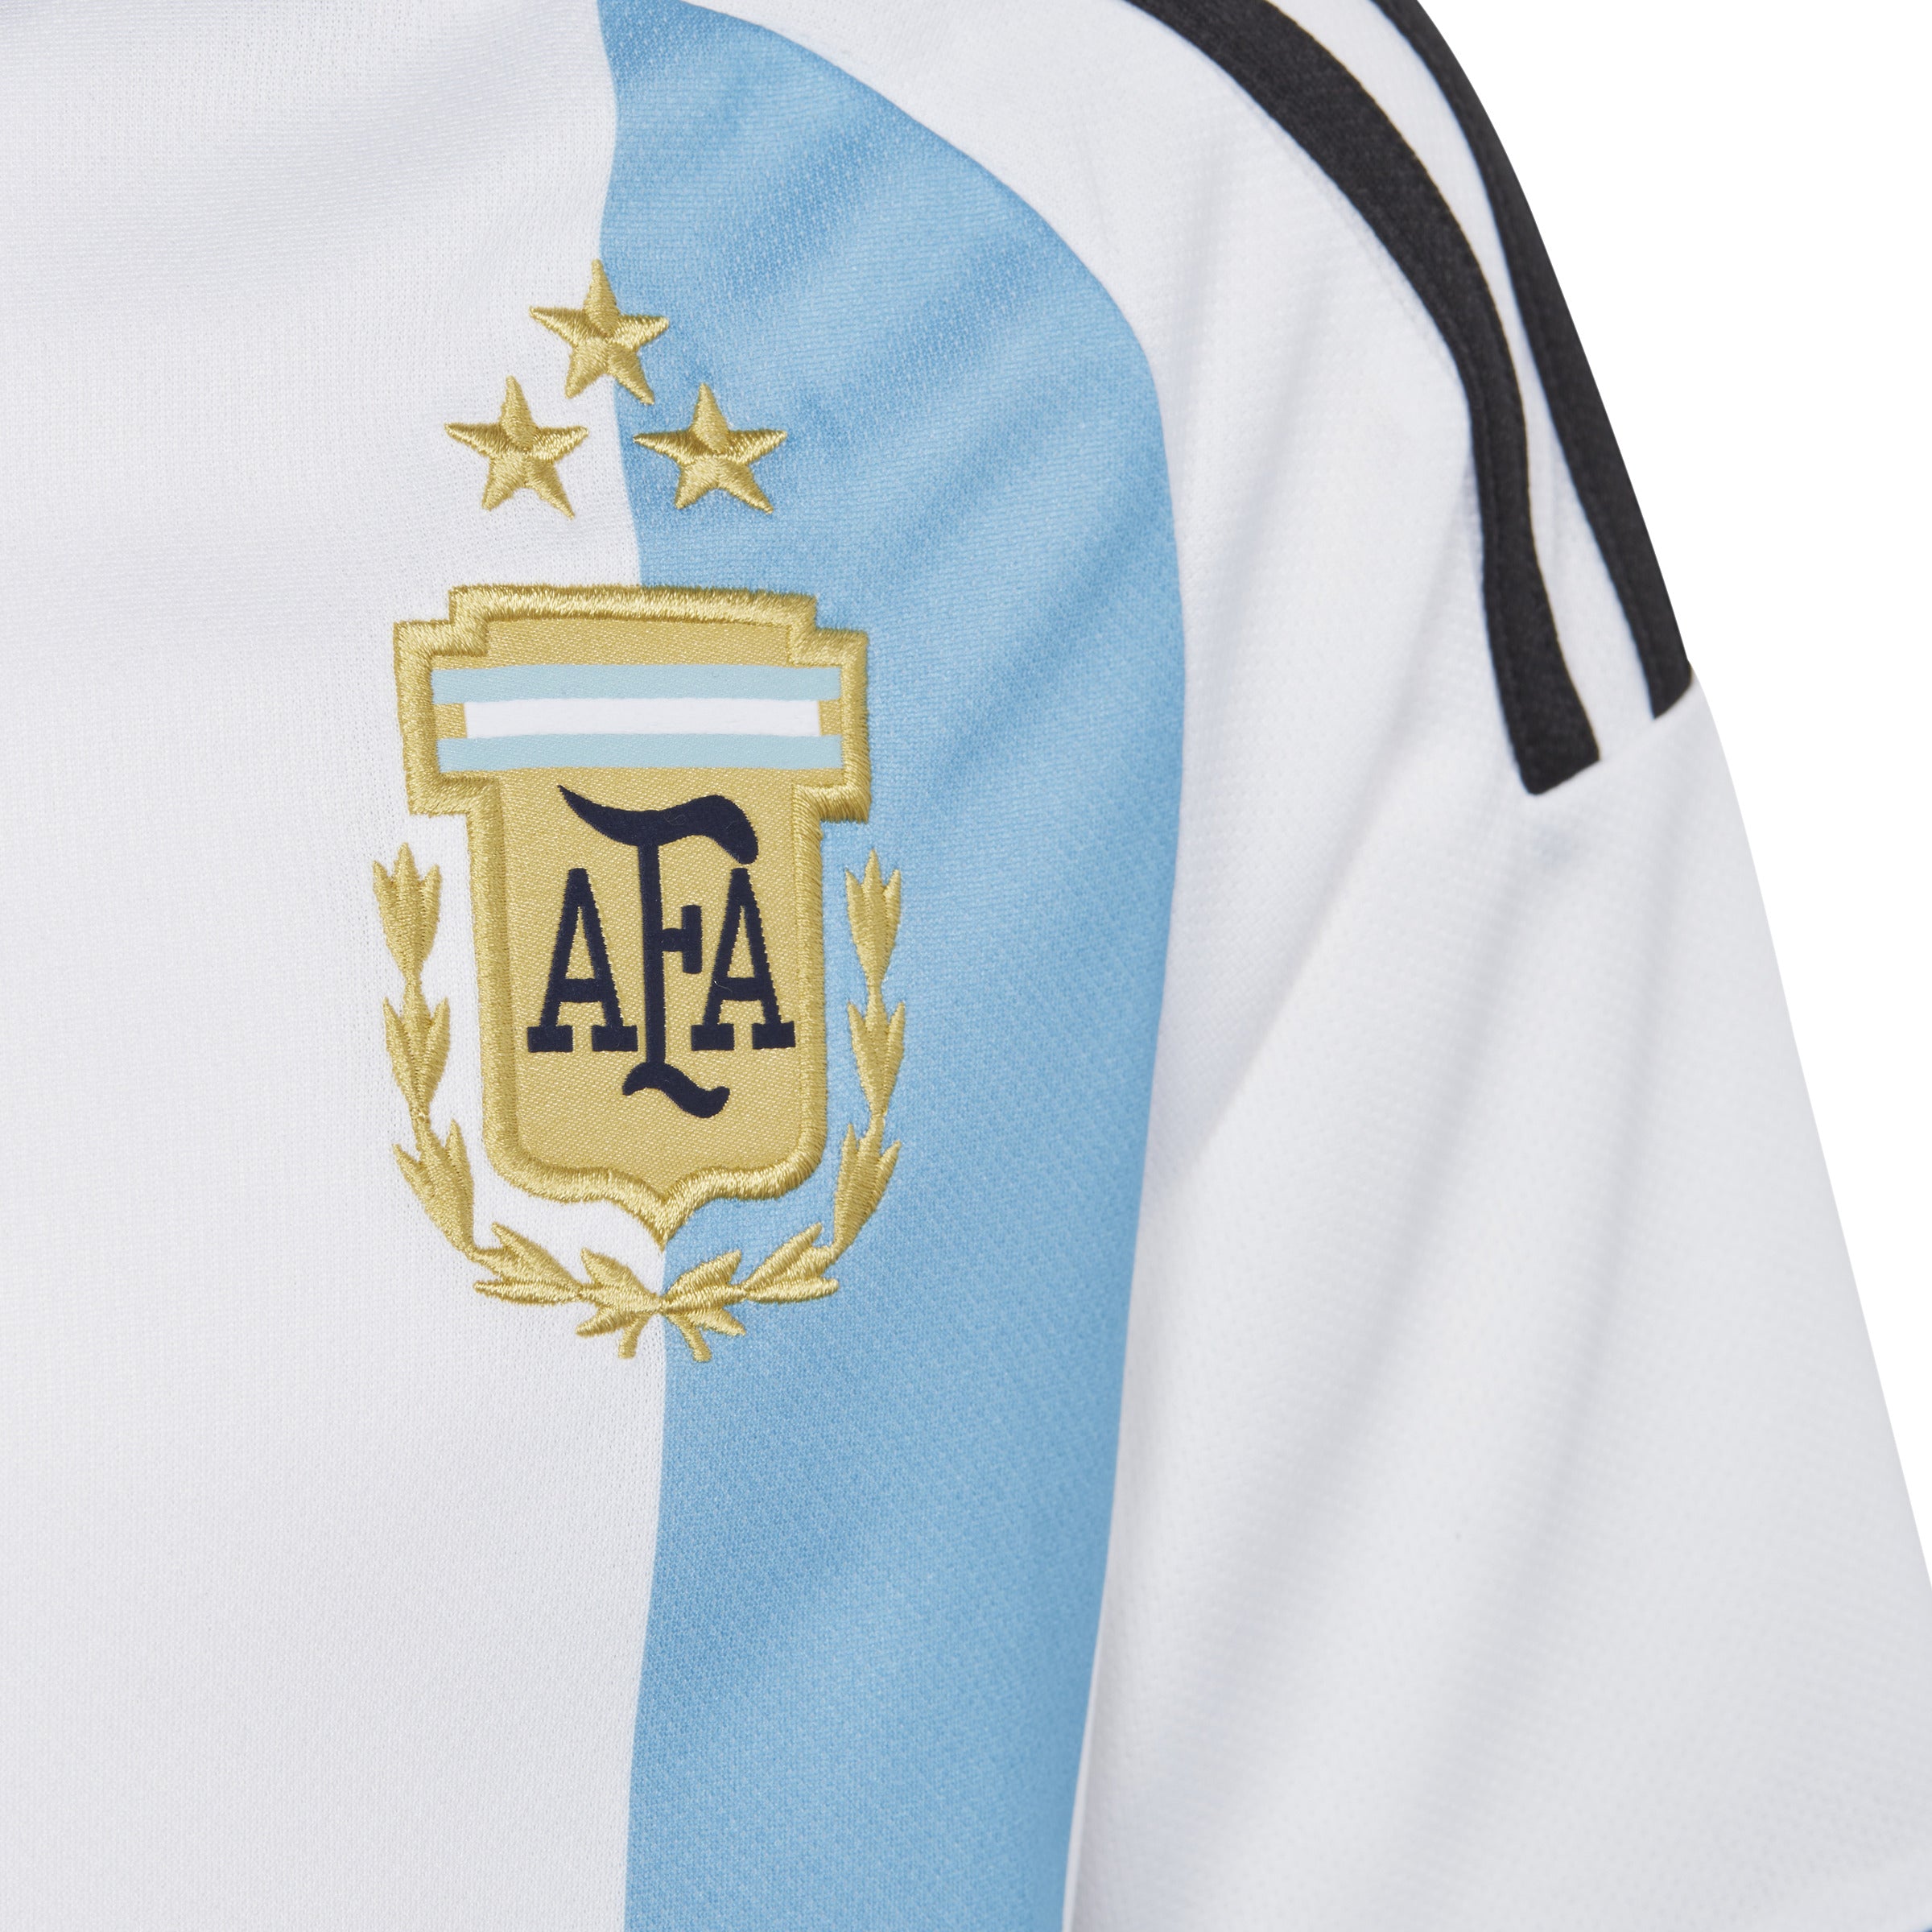 Adidas Argentina 2022 Youth Home Jersey - IB3595